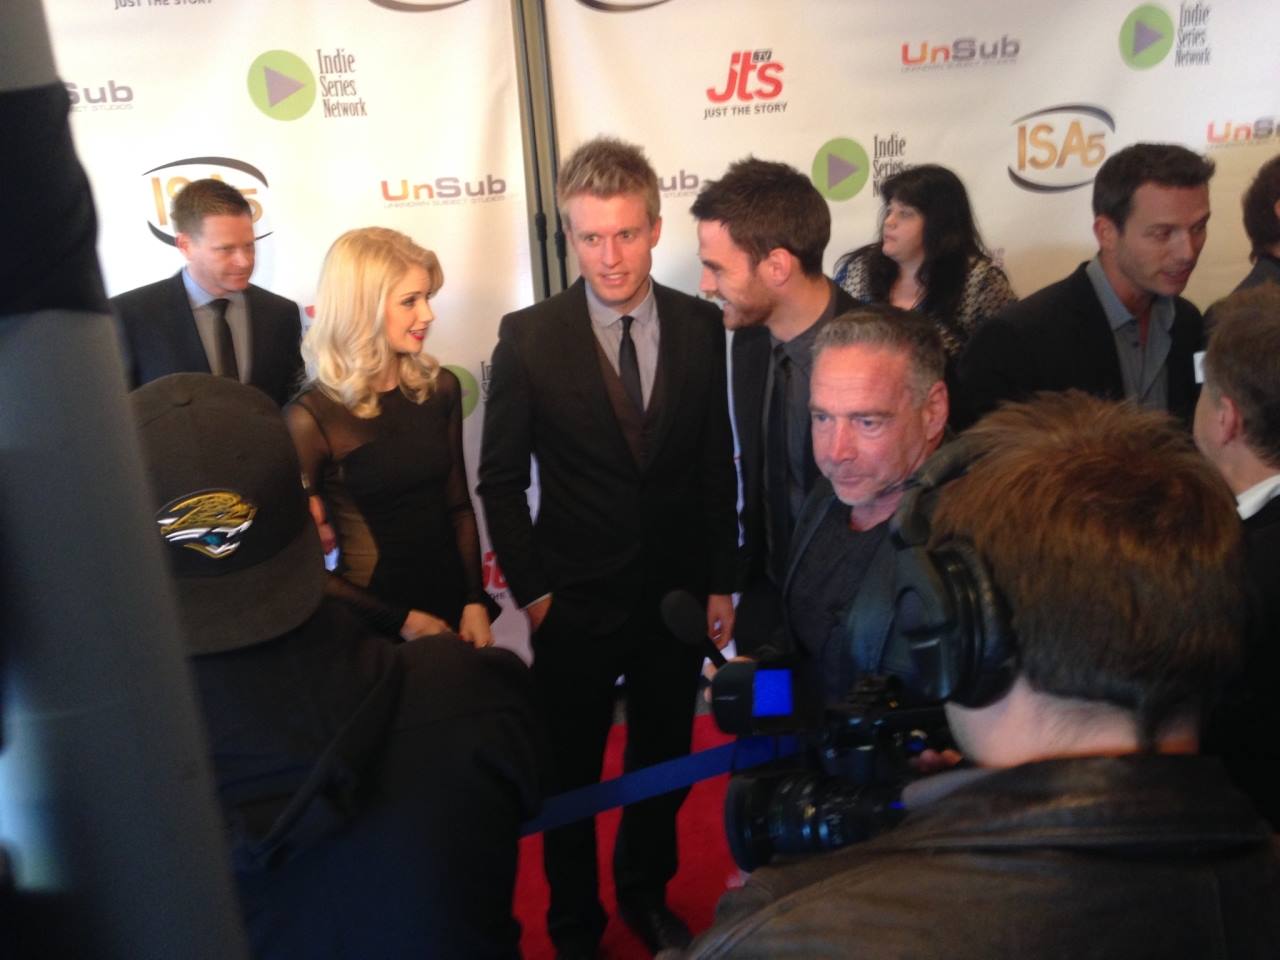 Nate Golon, Katie Gill, and Brent Bailey getting interviewed at the 2014 Indie Series Awards